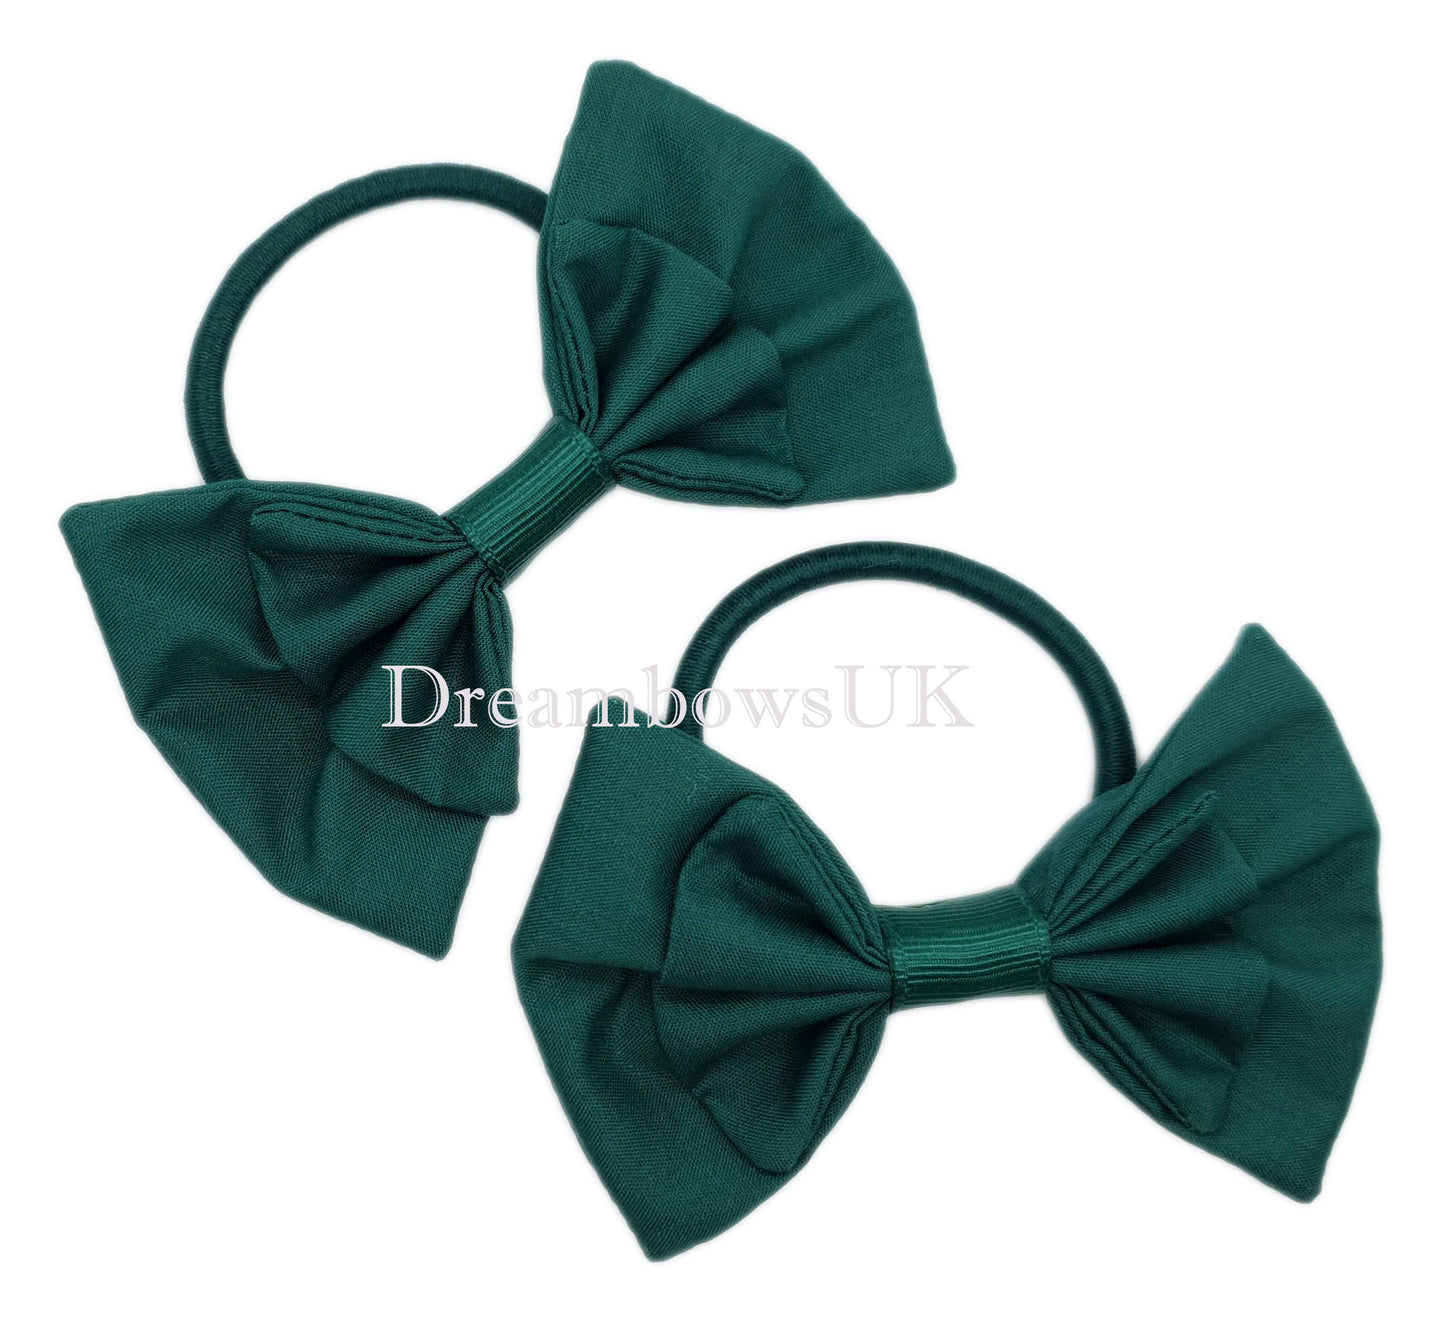 Bottle green school bows on thick hair ties